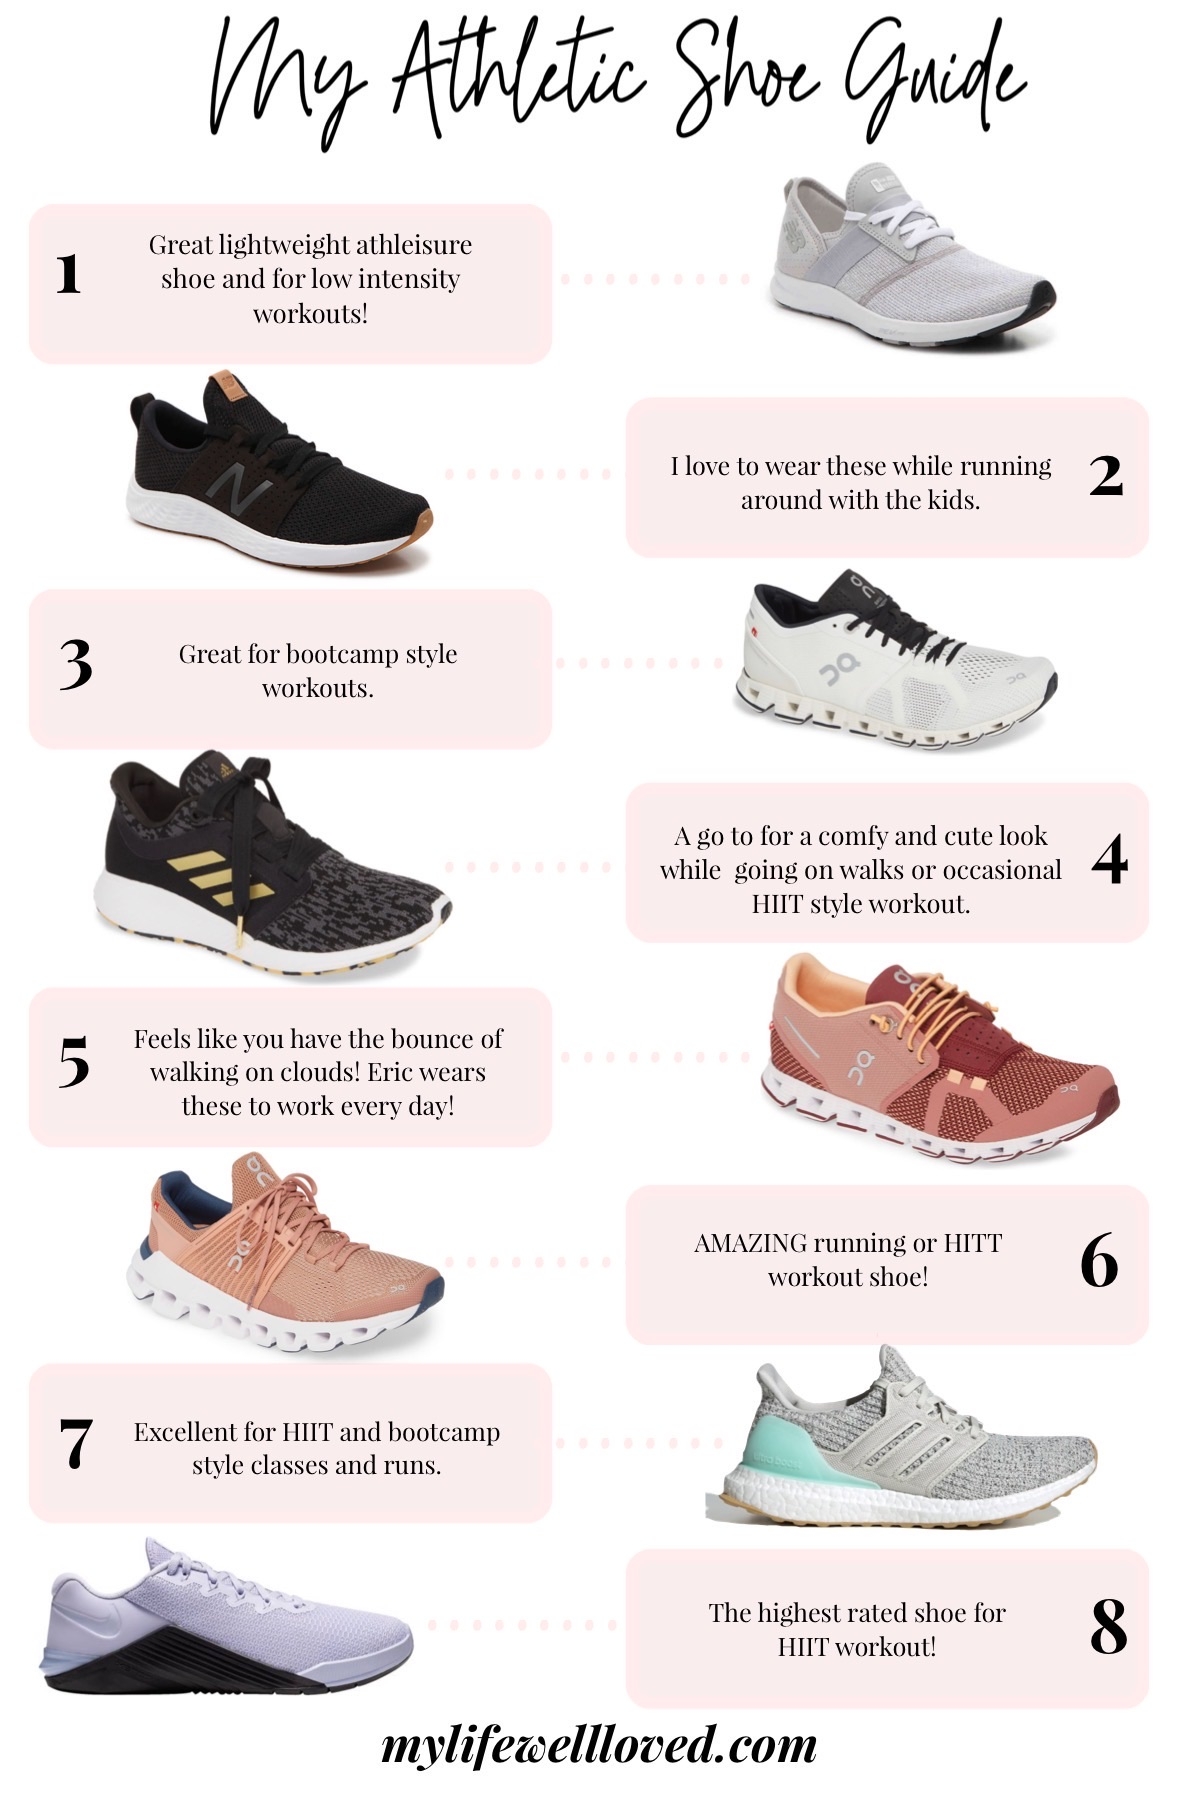 RoThe Best Athletic Shoes For Women - Healthy By Heather Brown